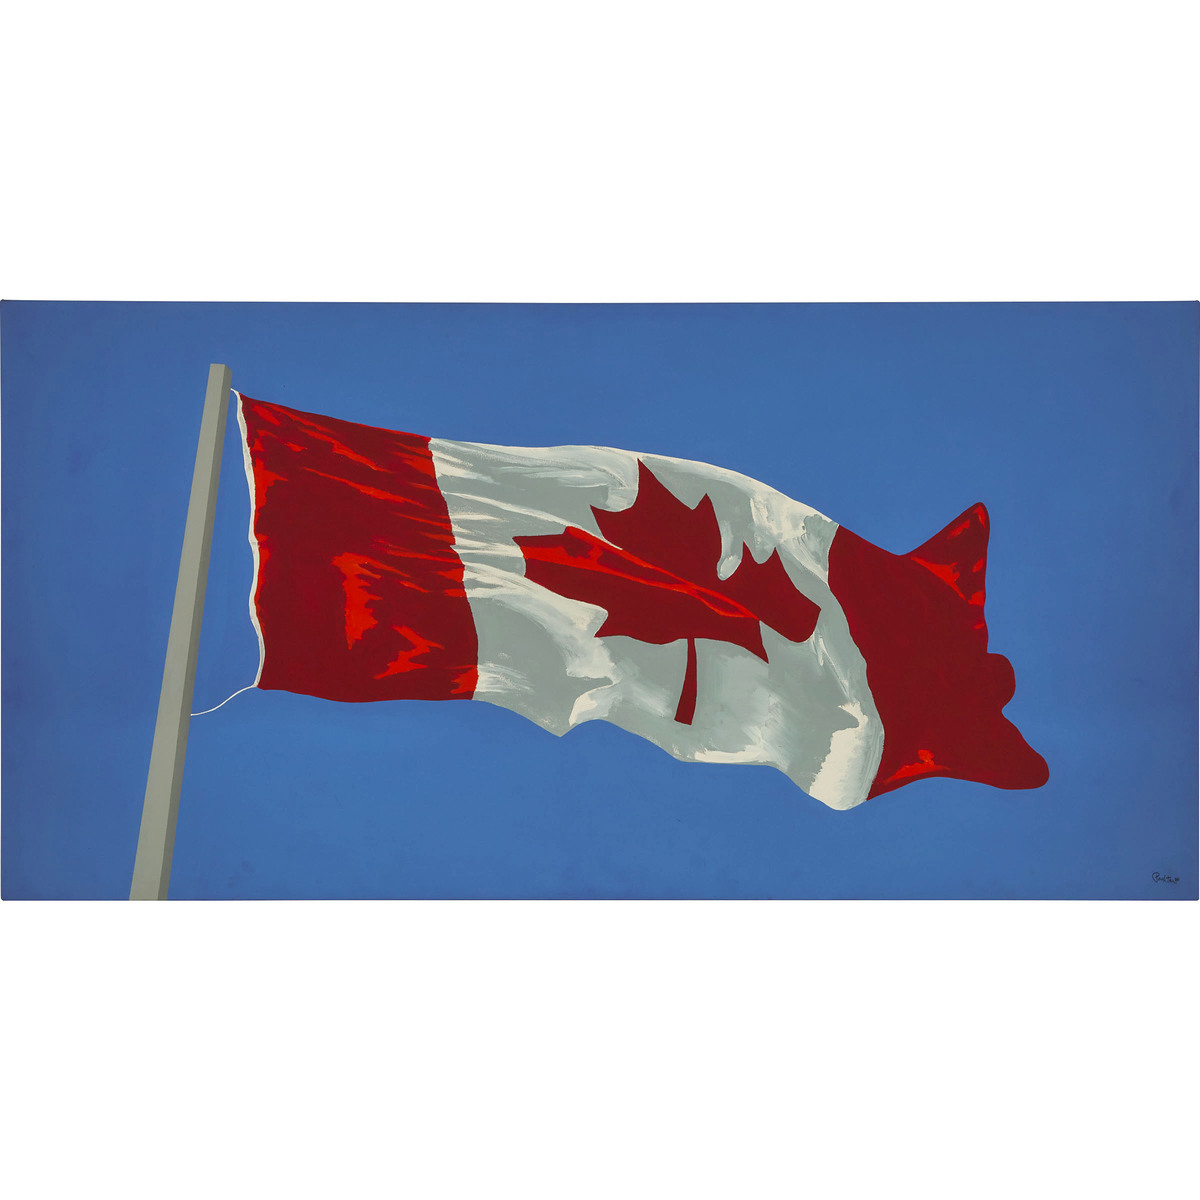 Charles Pachter (b. 1942), Canadian, THE PAINTED FLAG, 1986, 36 x 72 in — 91.4 x 182.9 cm - Image 2 of 7